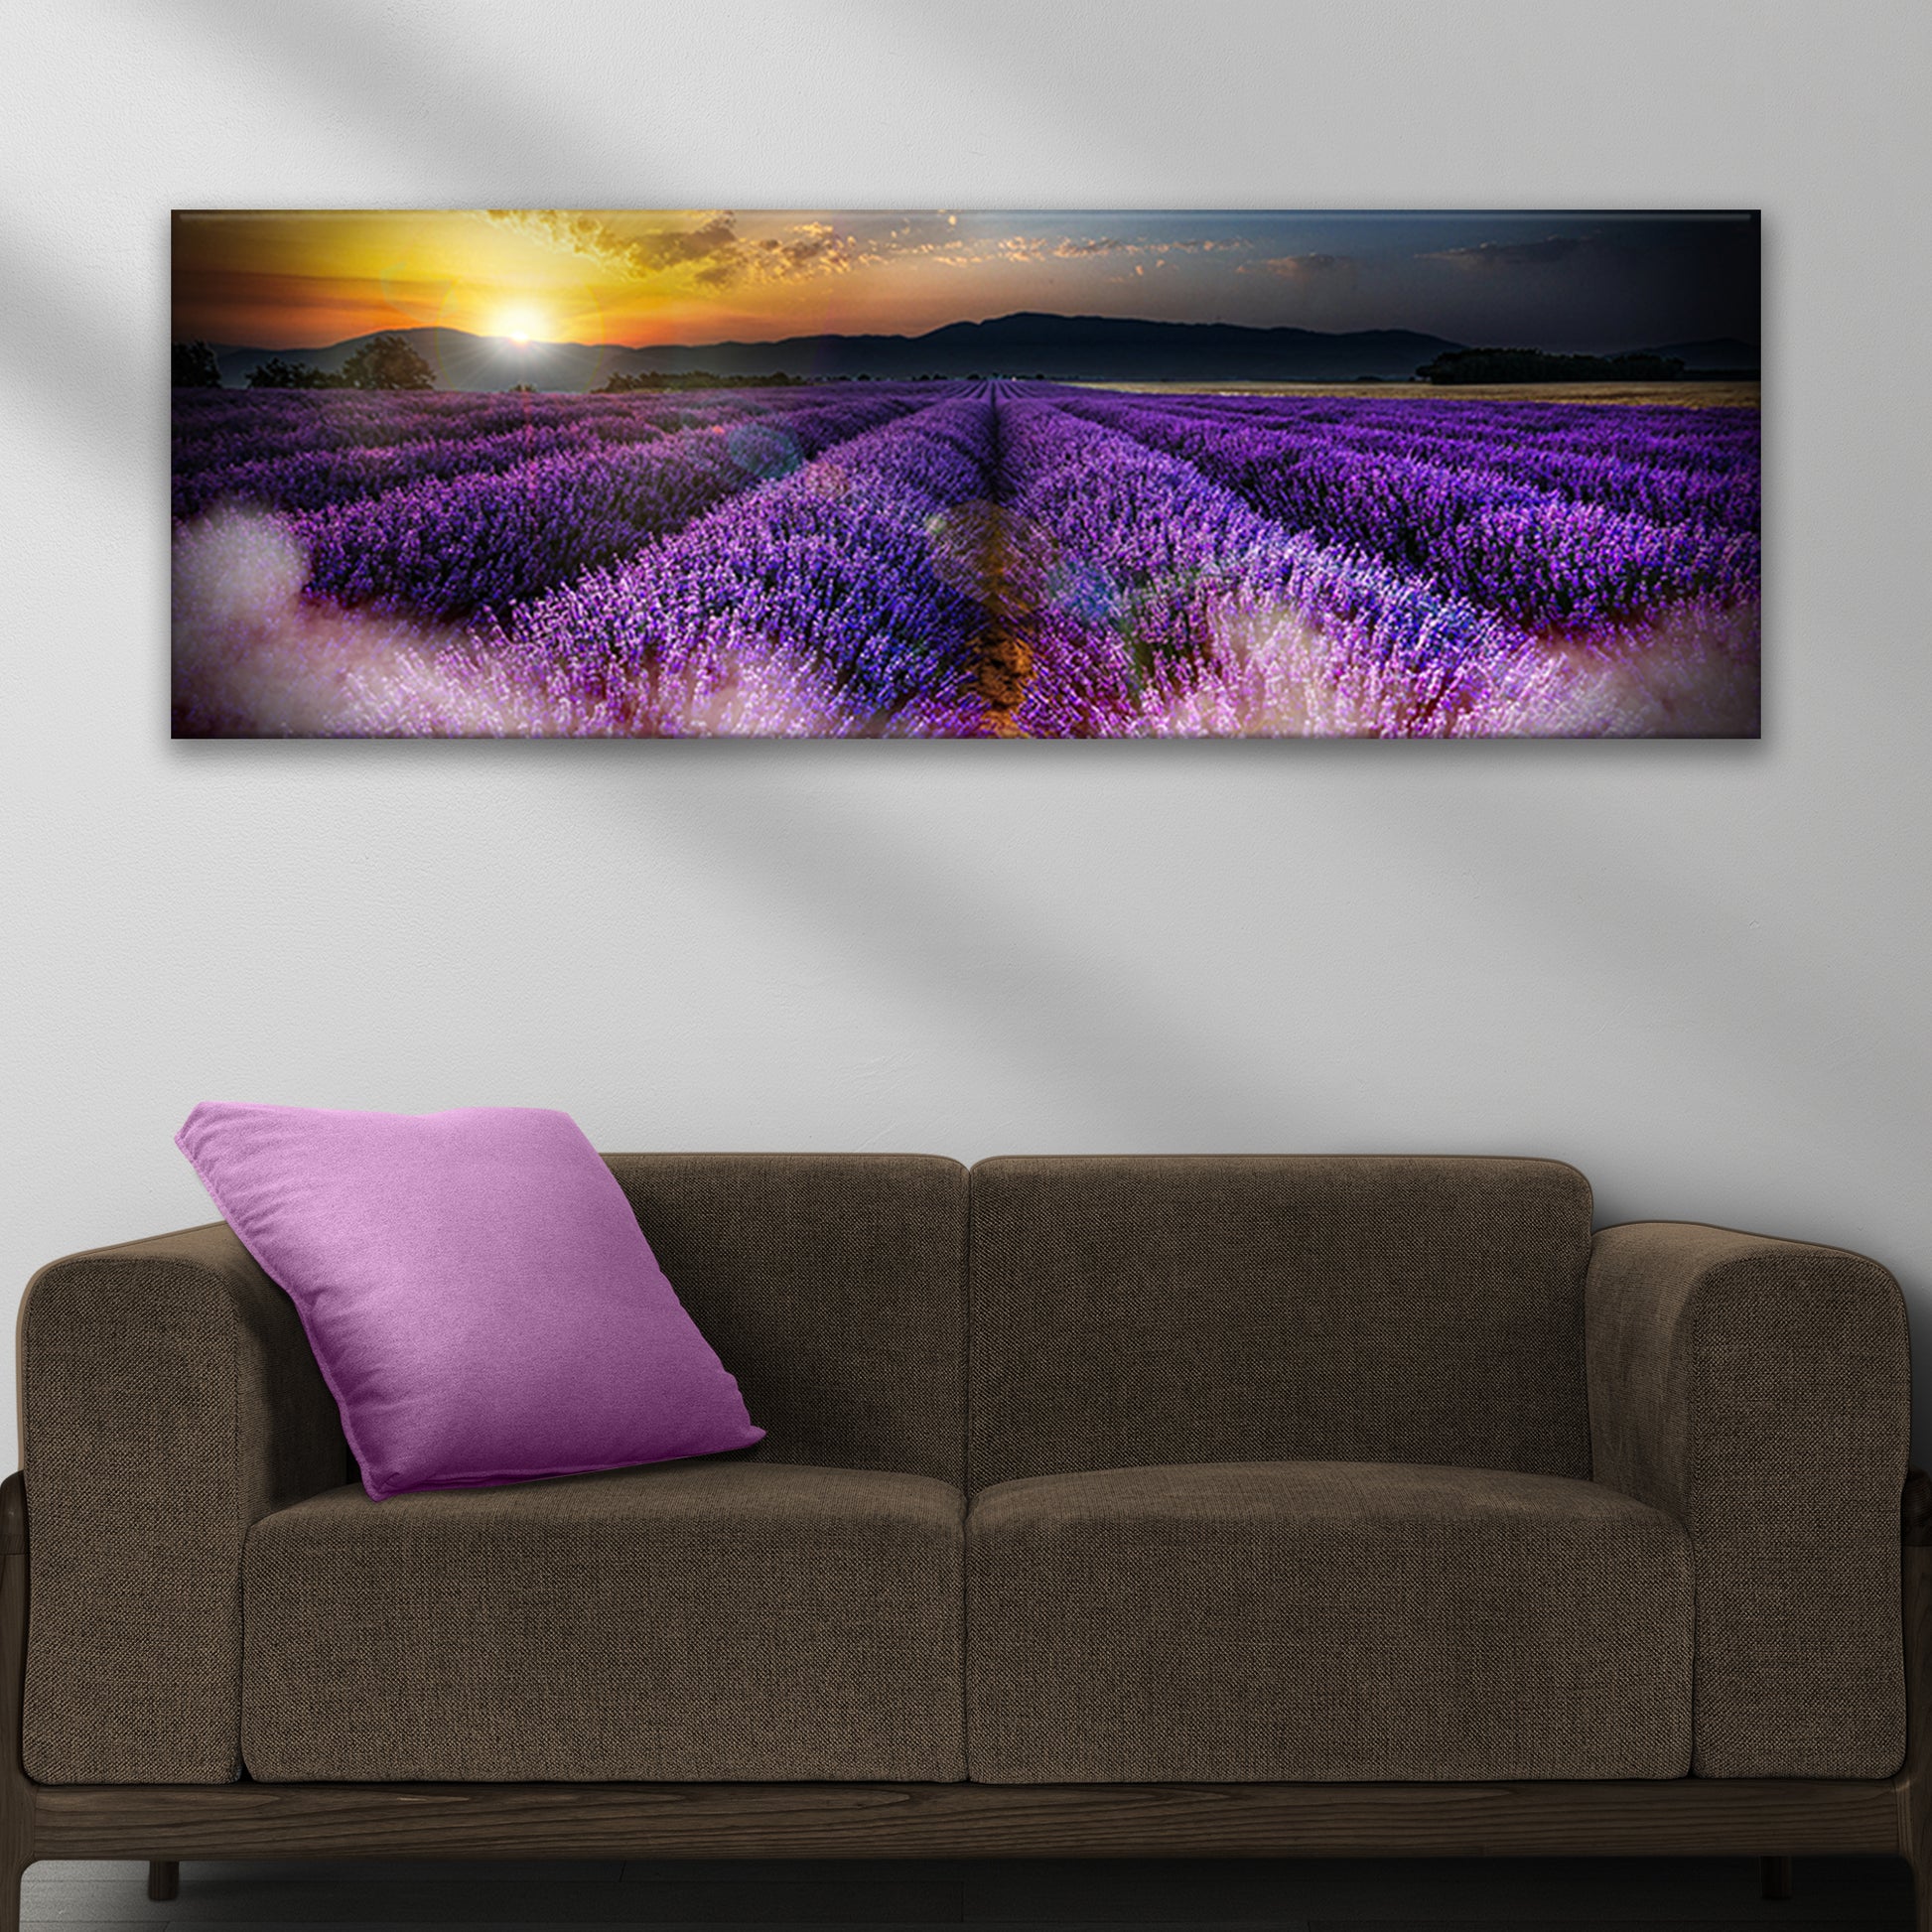 Sunset Over Lavender Field Canvas Wall Art Style 2 - Image by Tailored Canvases